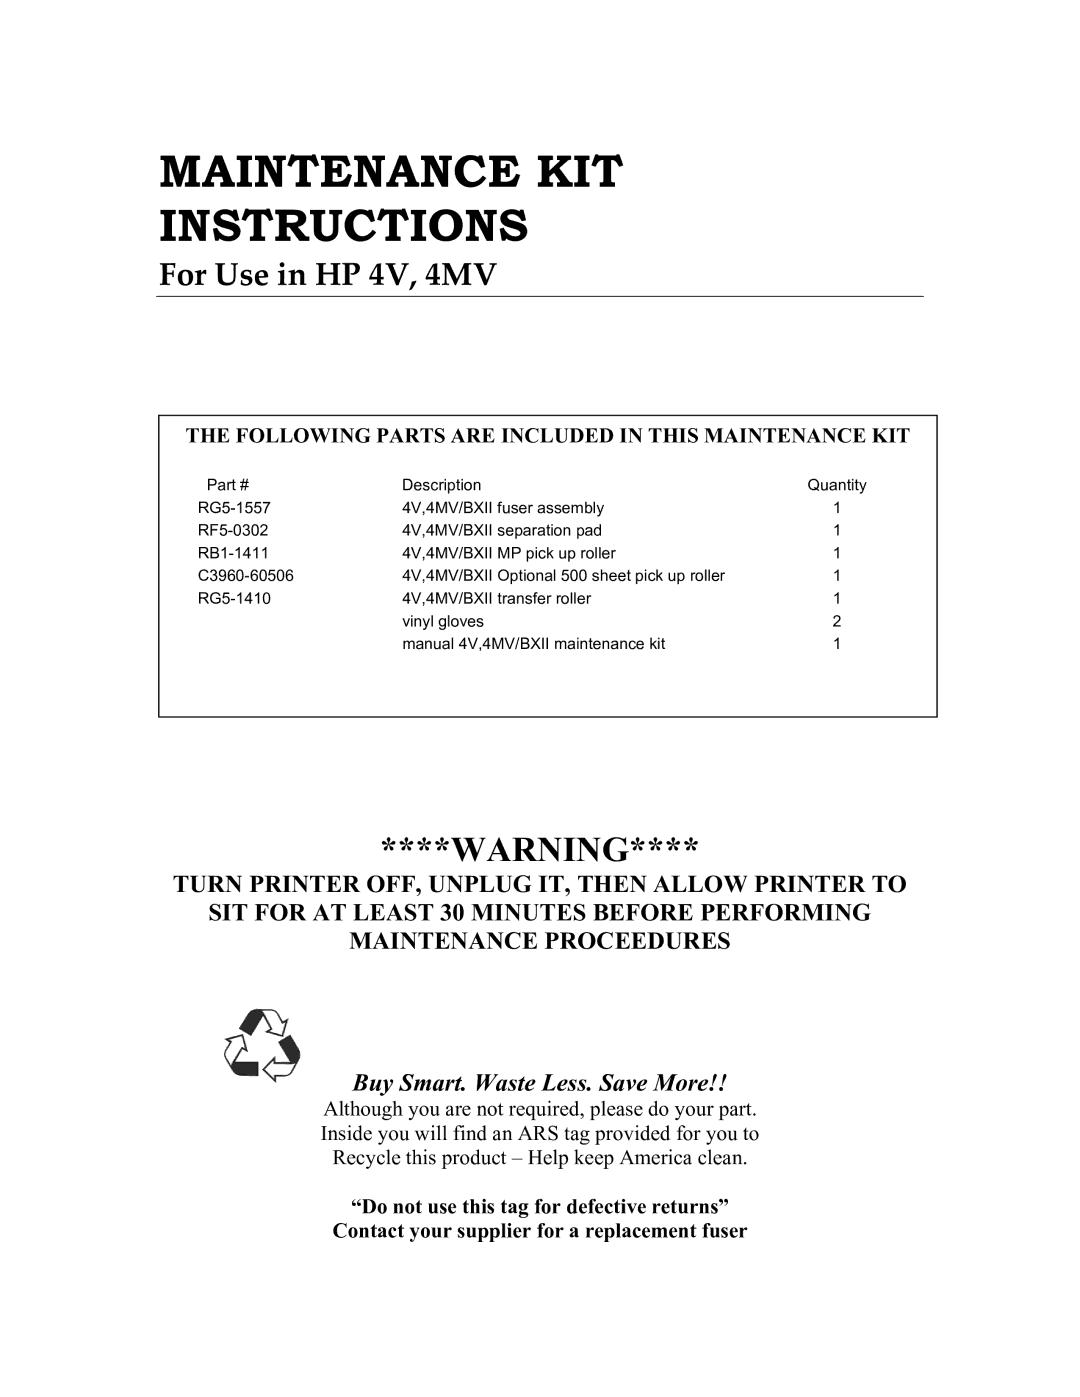 HP manual Maintenance KIT Instructions, For Use in HP 4V, 4MV, Buy Smart. Waste Less. Save More 